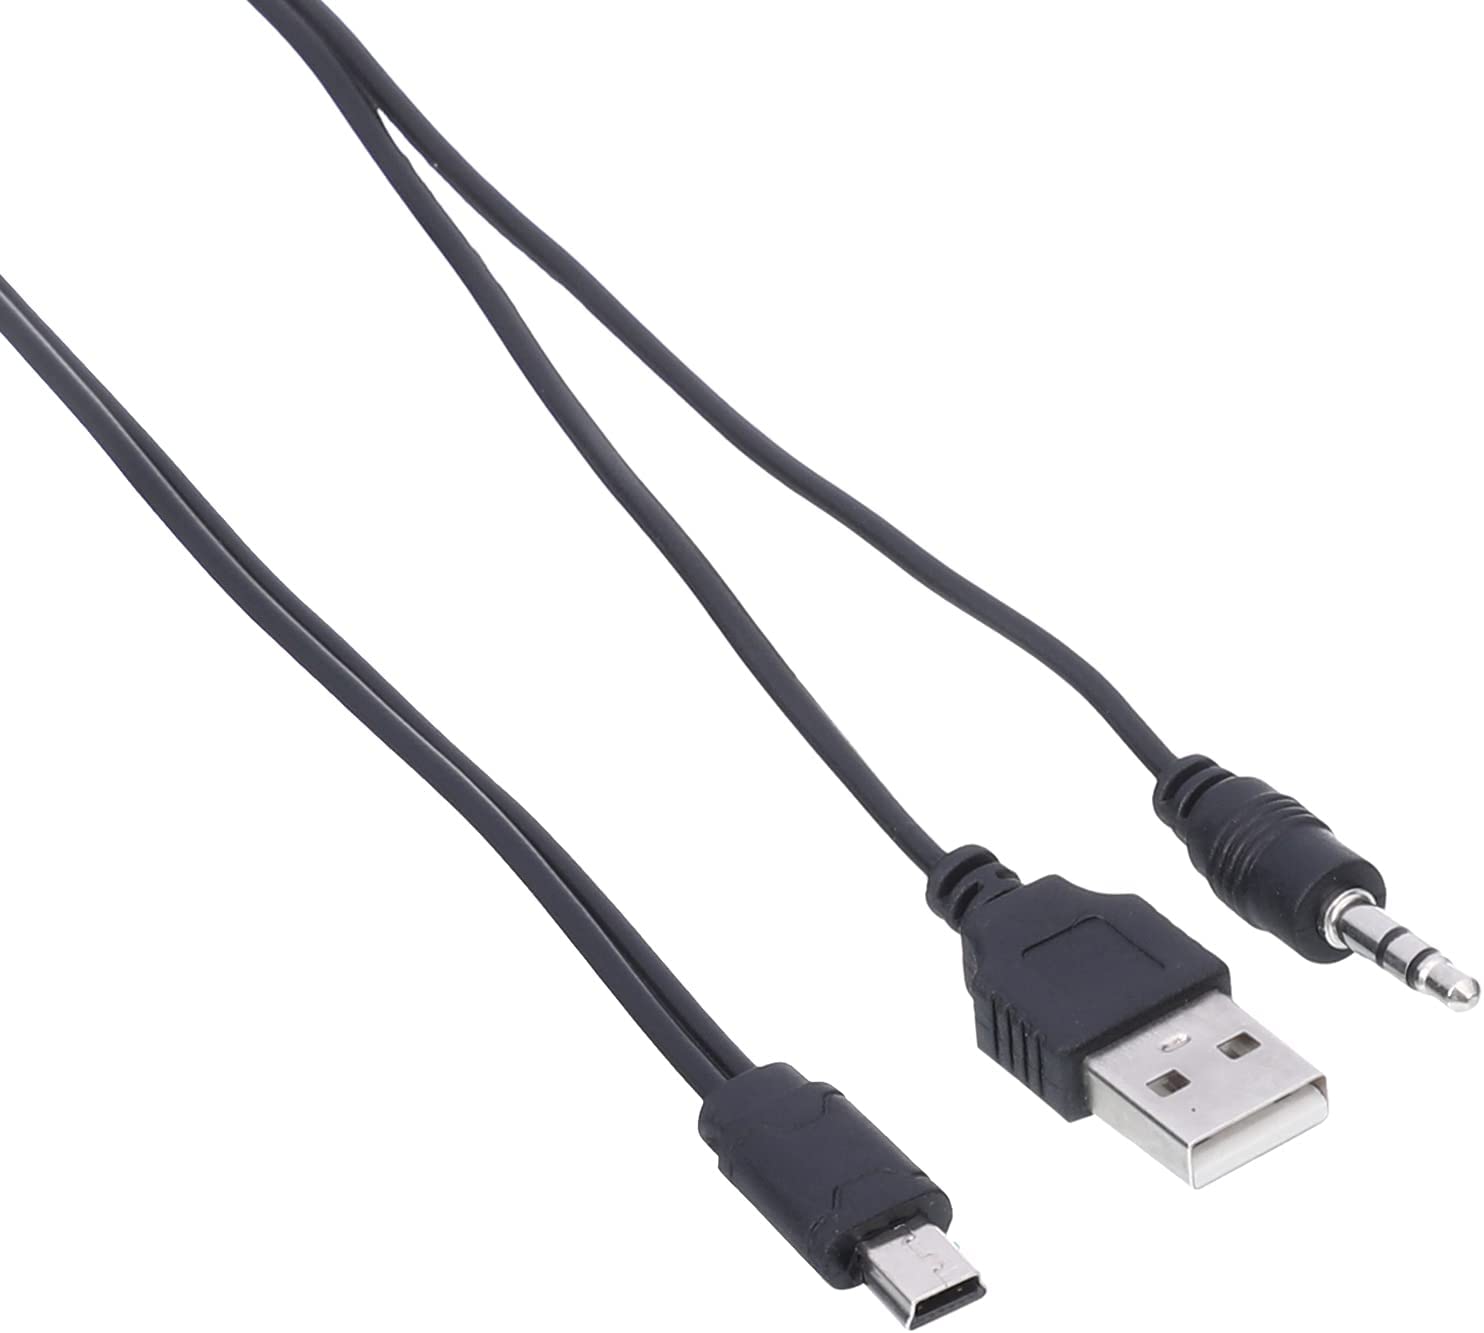 Keendex 2 in 1 USB Cable with AUX Connector, 20 Cm, Black- 1775